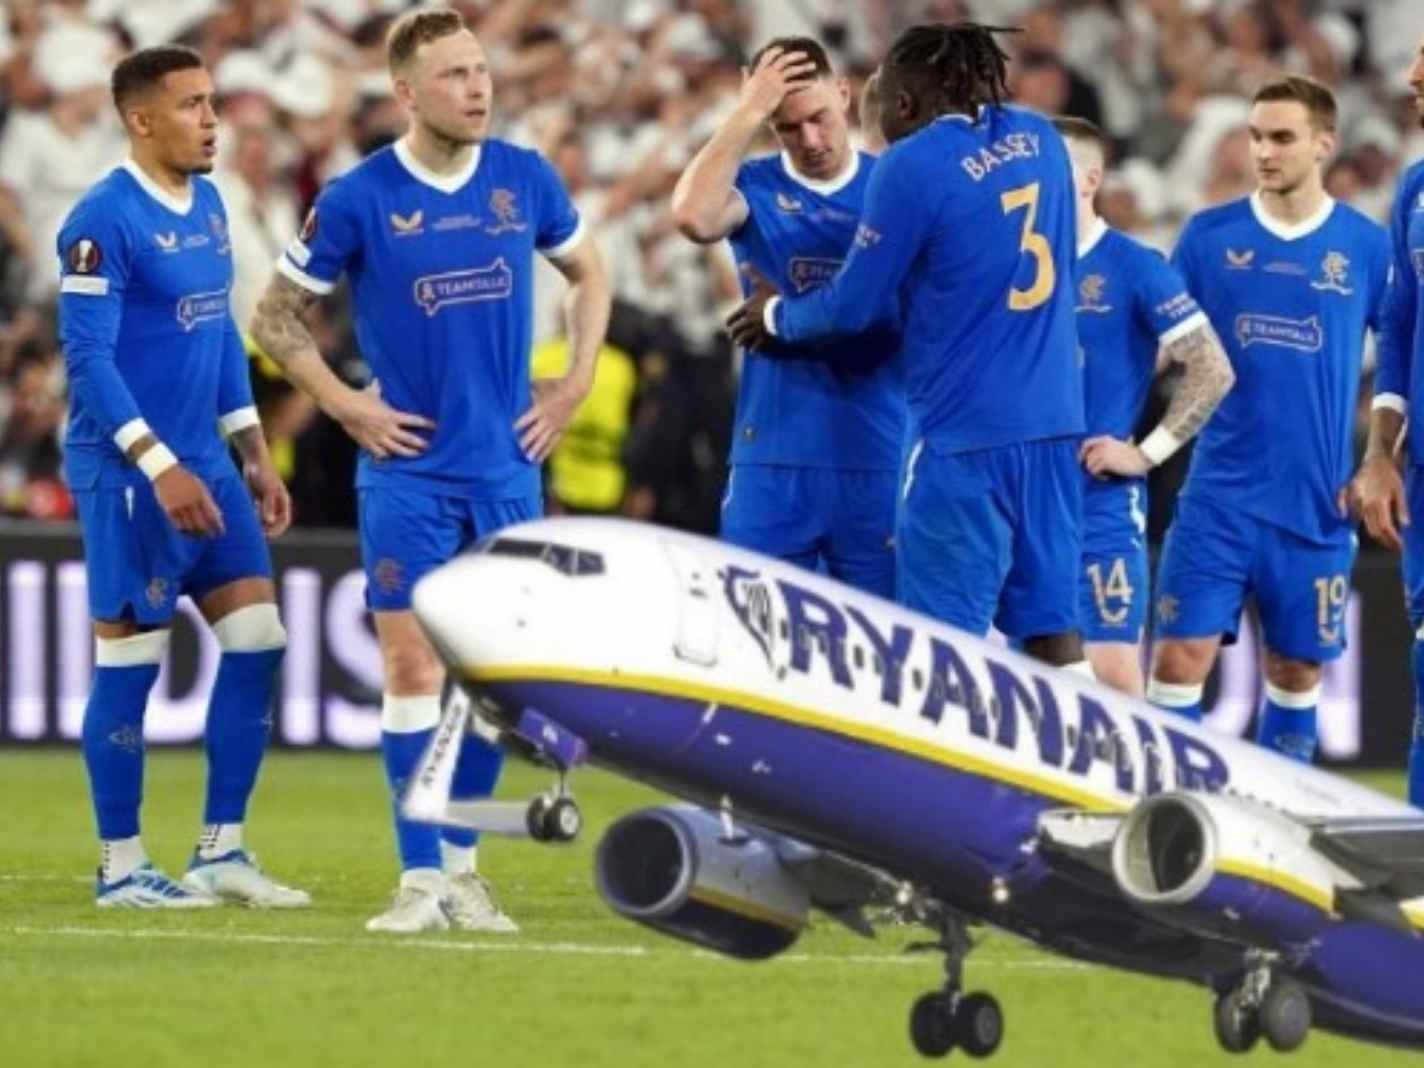 The photo shows Rangers players and a Ryanair plane.